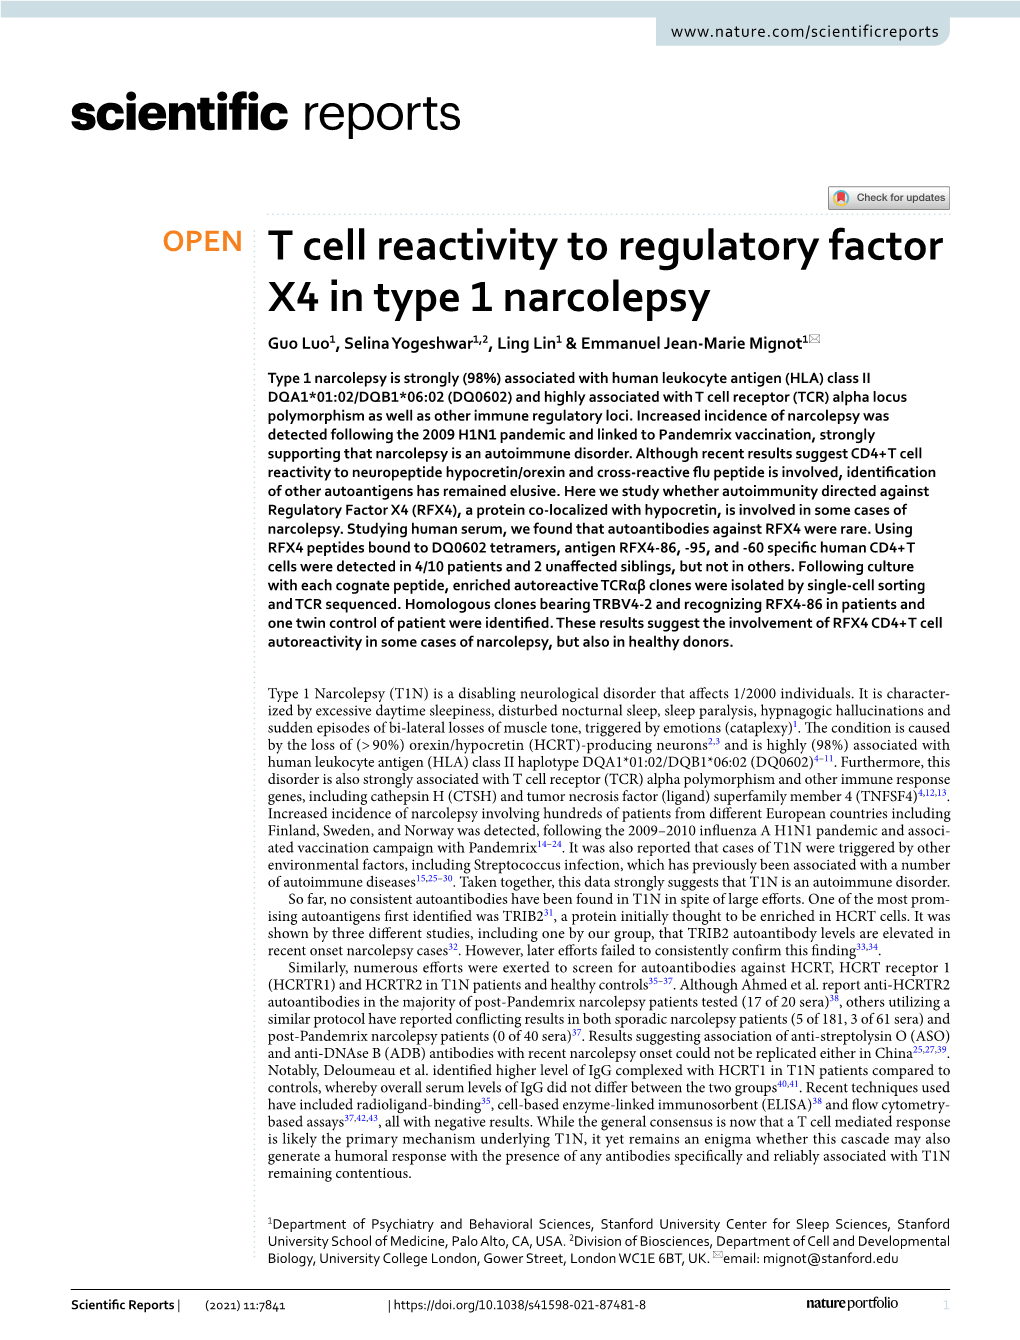 T Cell Reactivity to Regulatory Factor X4 in Type 1 Narcolepsy Guo Luo1, Selina Yogeshwar1,2, Ling Lin1 & Emmanuel Jean‑Marie Mignot1*